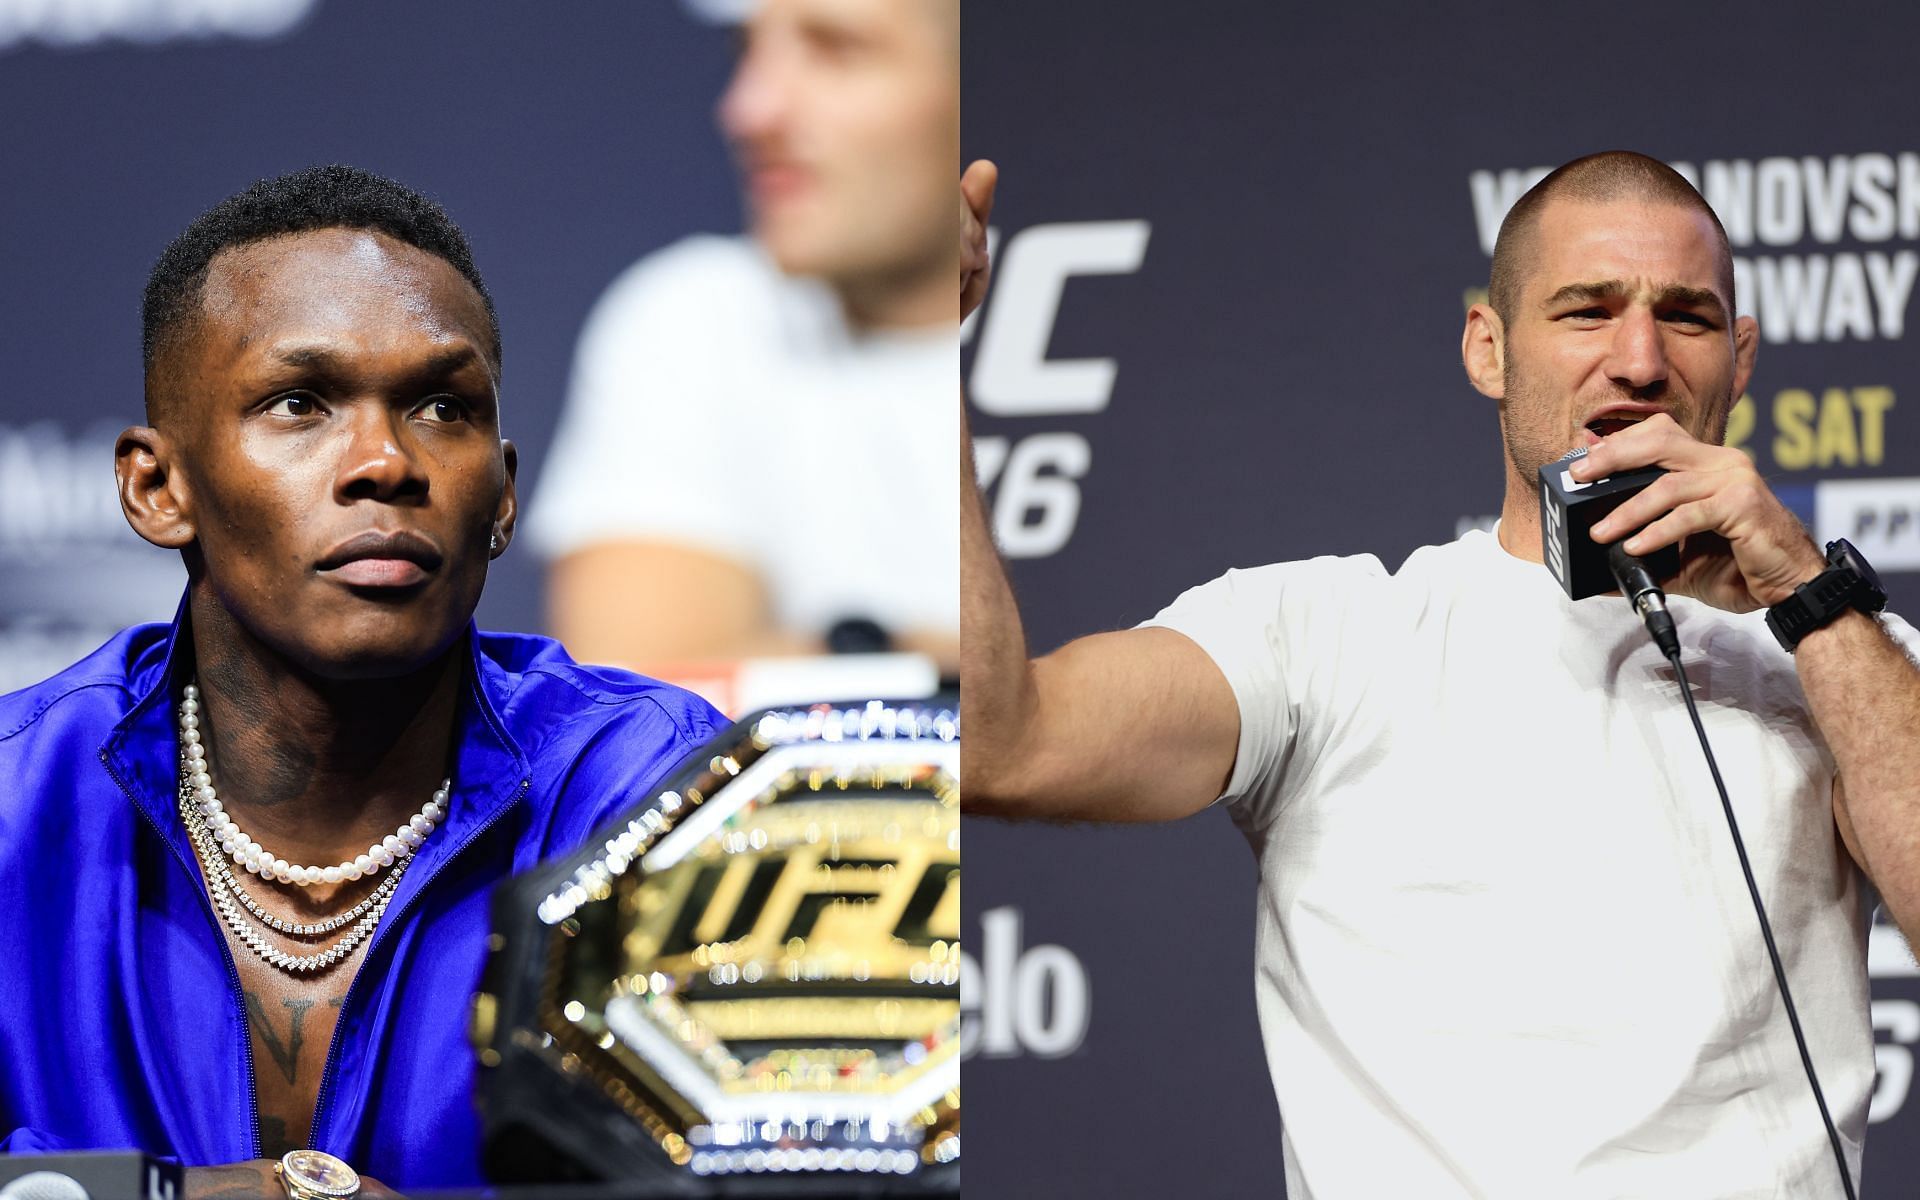 Israel Adesanya (left) and Sean Strickland (right) [Image Courtesy: Getty Images]